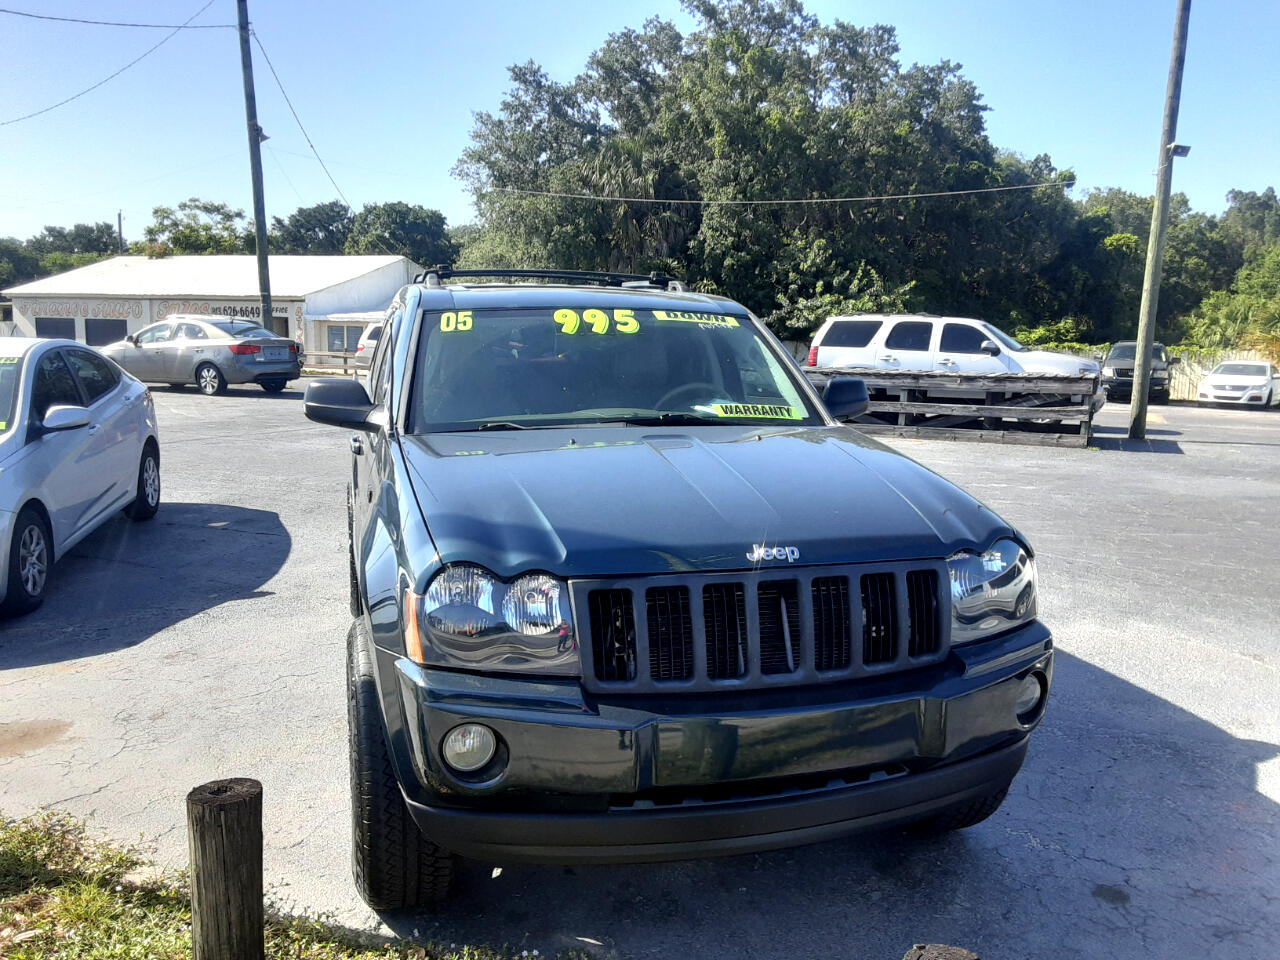 Jeep Grand Cherokee Limited 4WD 2005